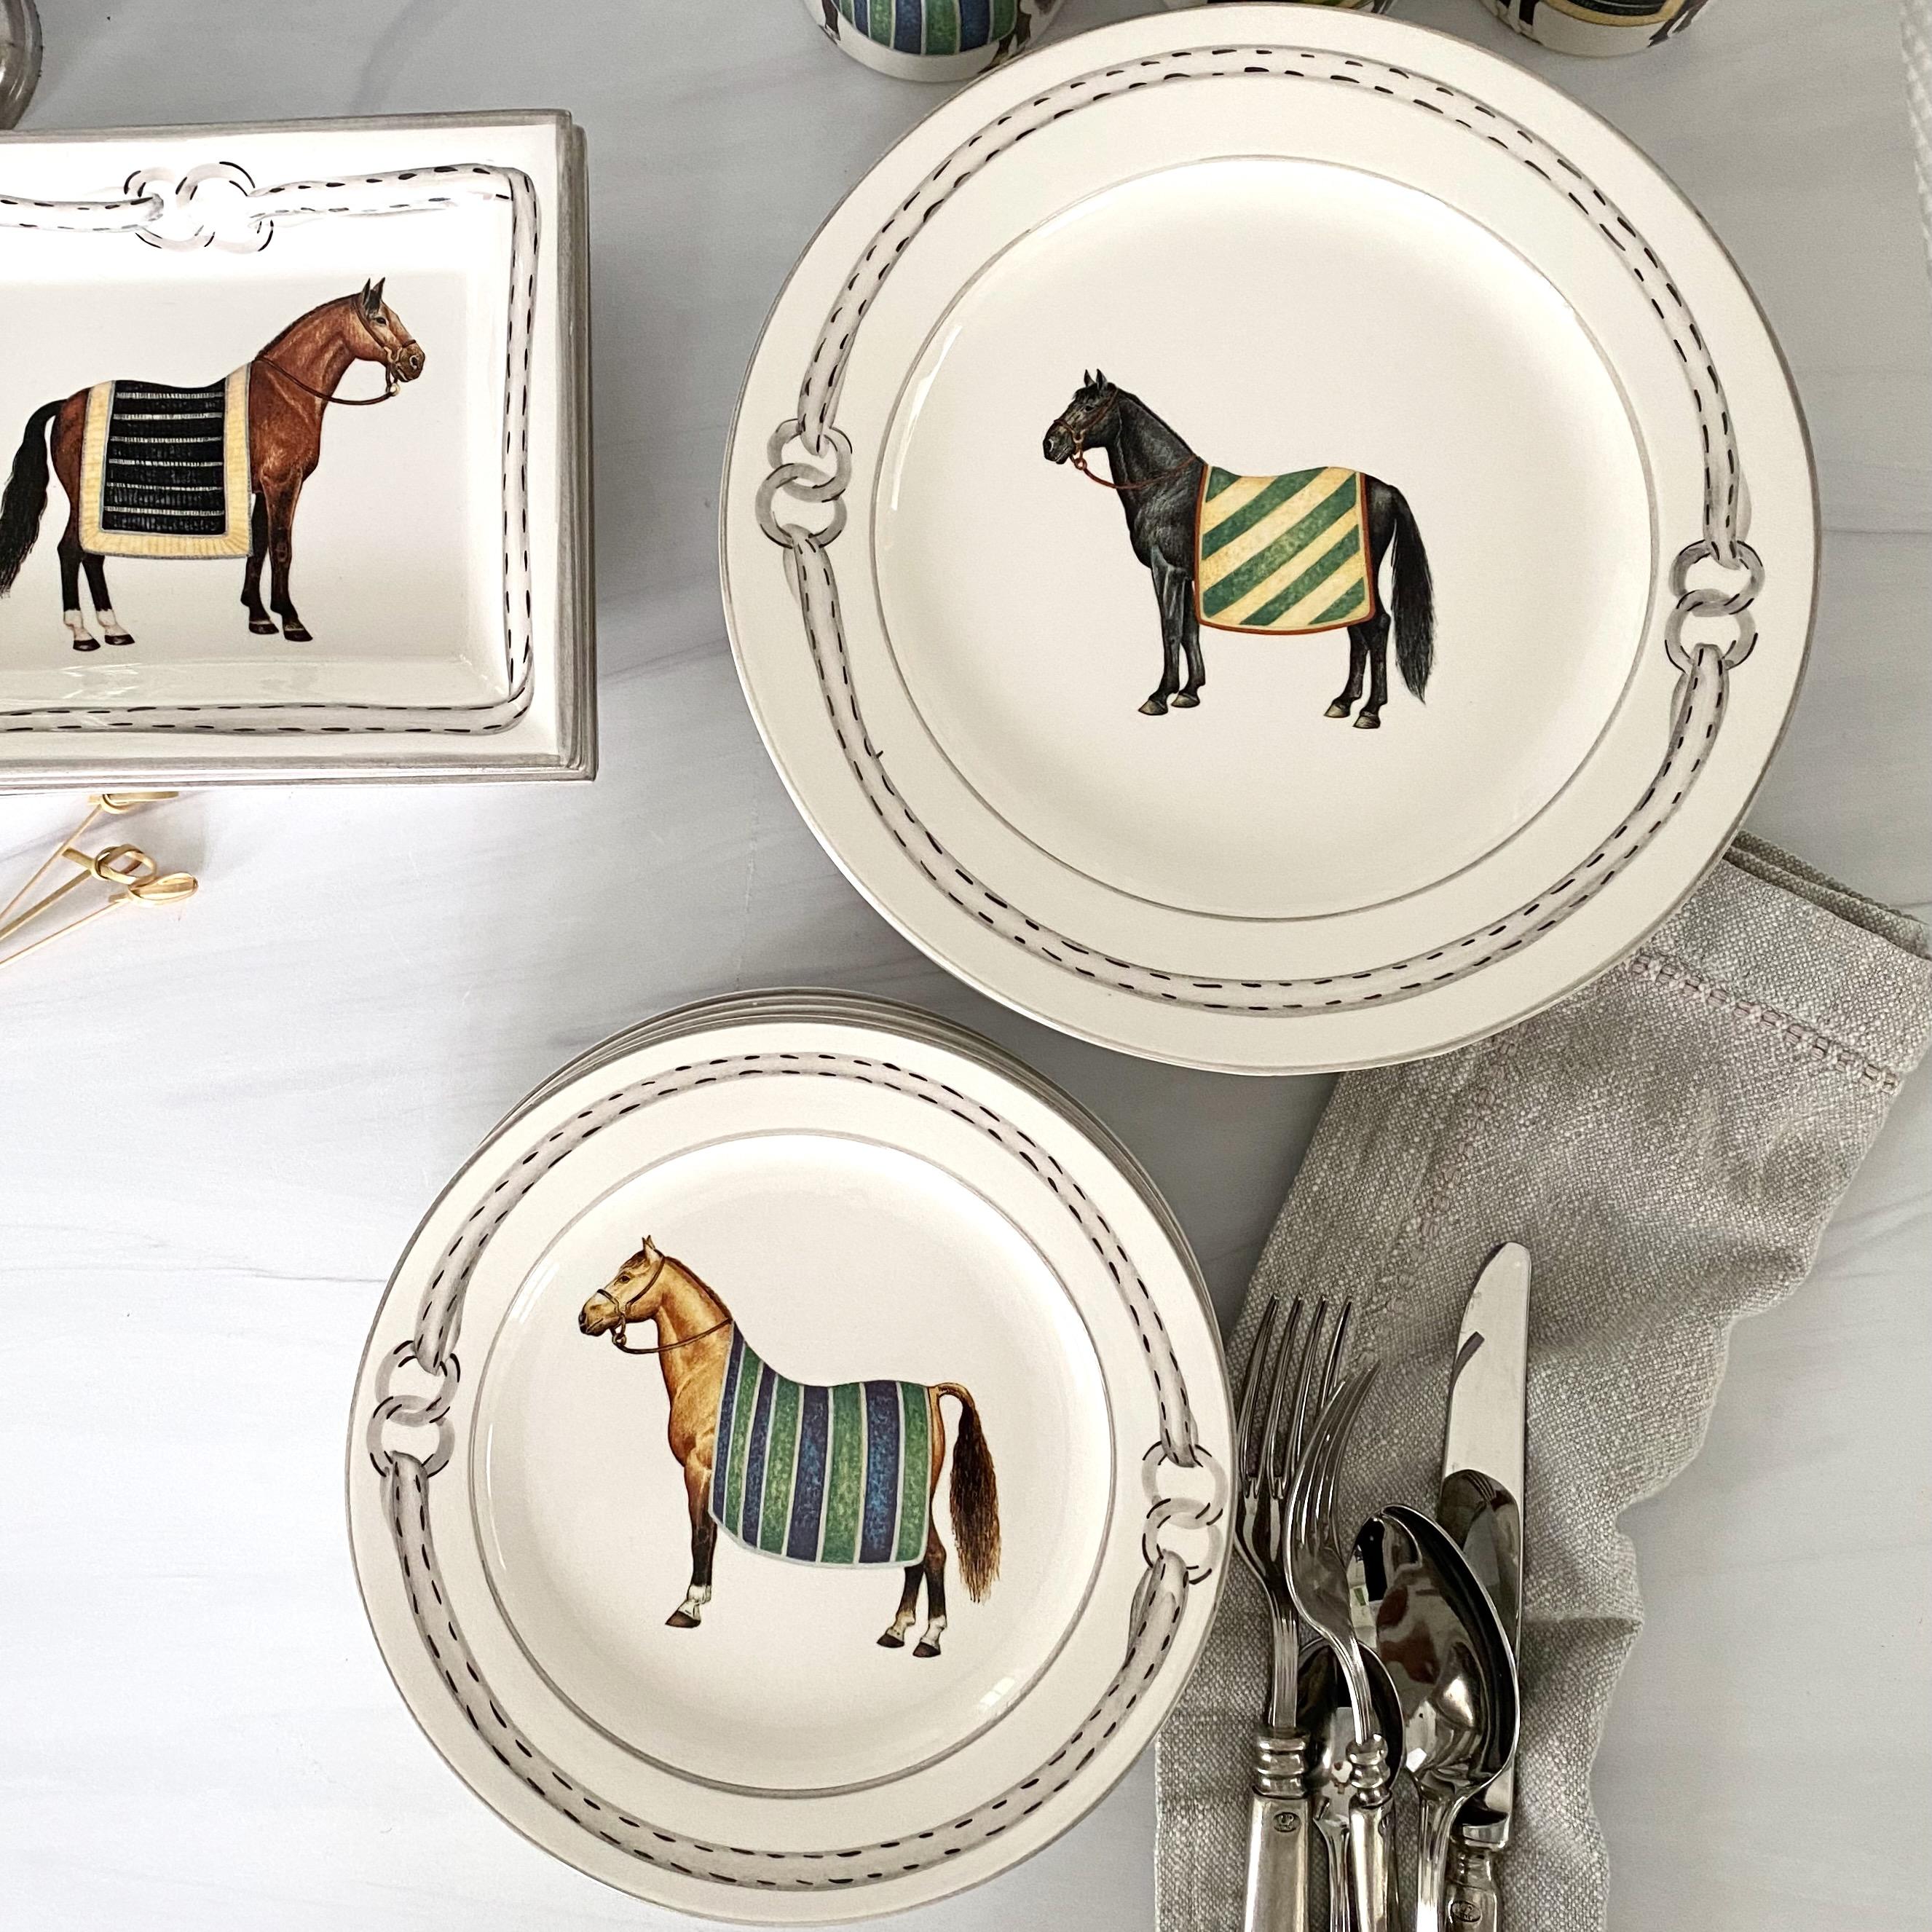 Equestrian Salad Plates, Set of 4 different blanketed horses. Made in Italy for The Mane Lion,


The Mane Lion was born in 1979 in the heart of Philadelphia's fabled Main Line, offering a line of charming, hand-painted chip-and-dip serving pieces